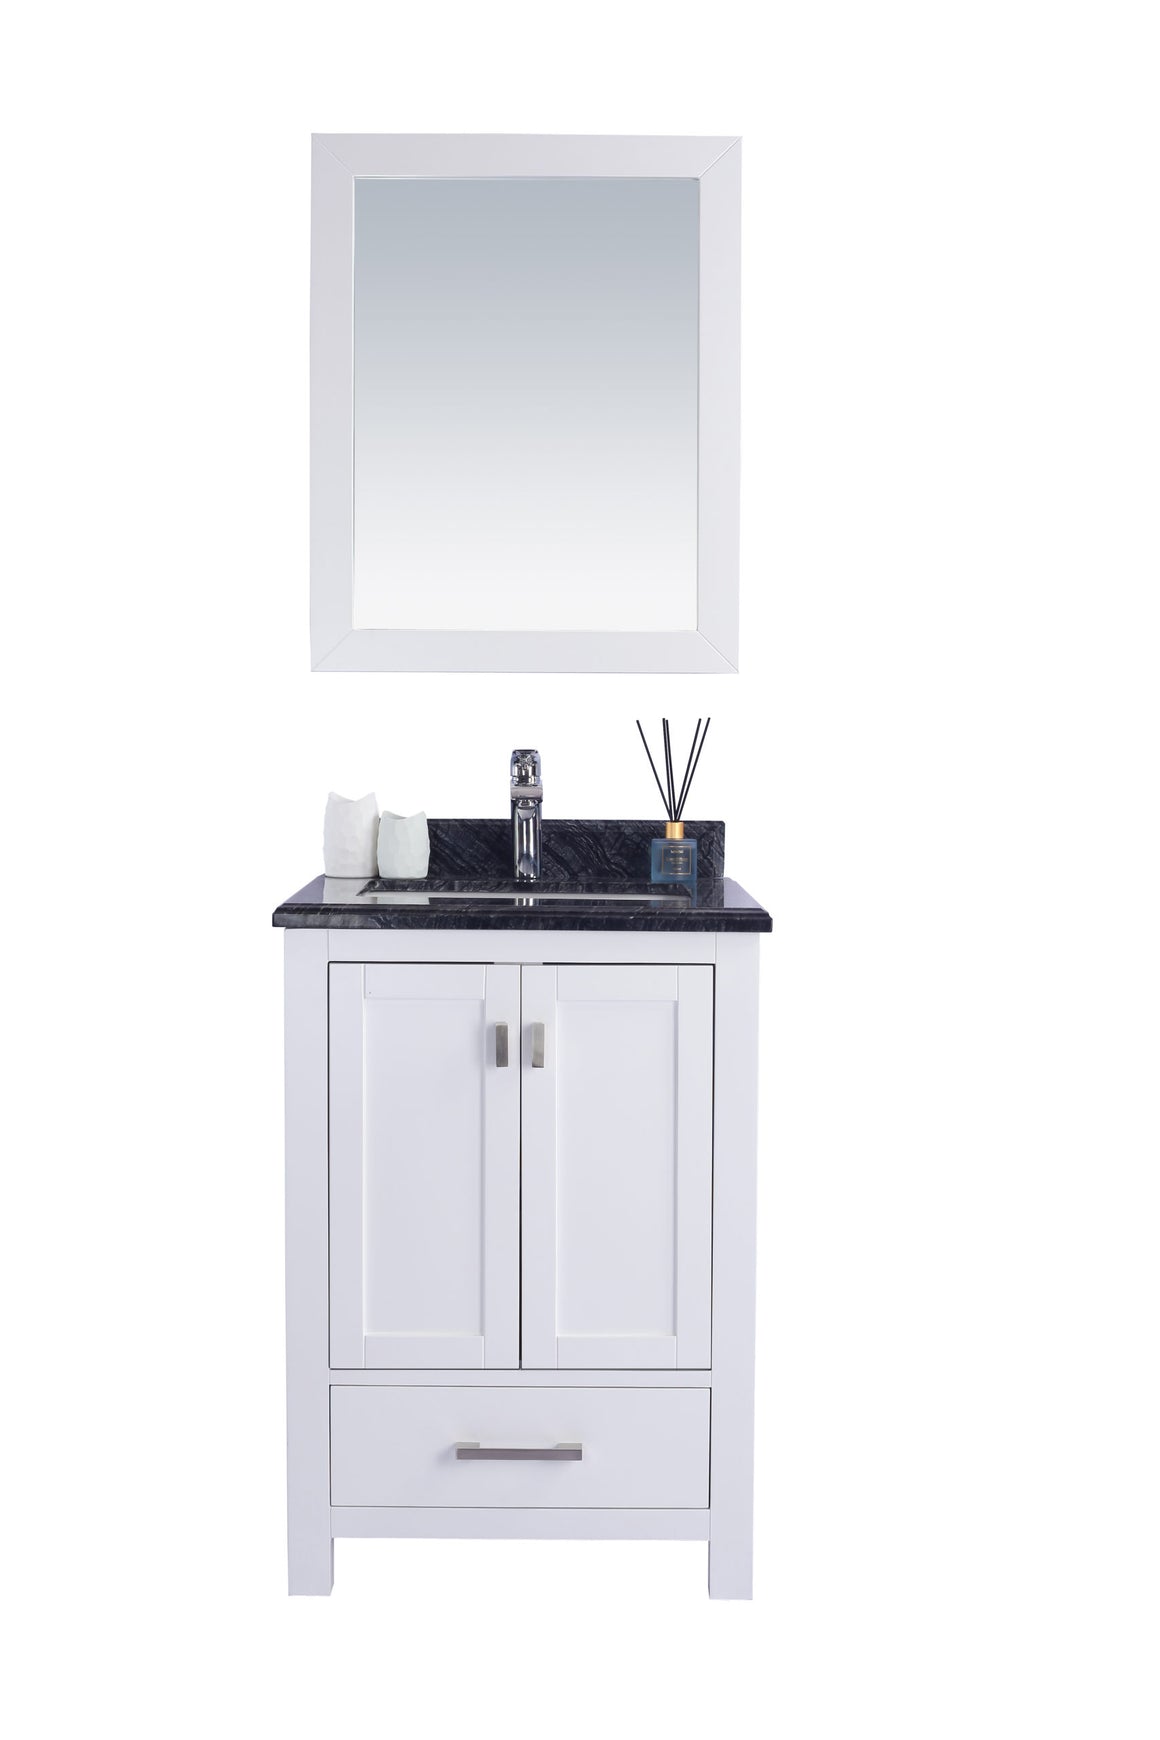 Wilson 24 - White Cabinet + Black Wood Marble Countertop